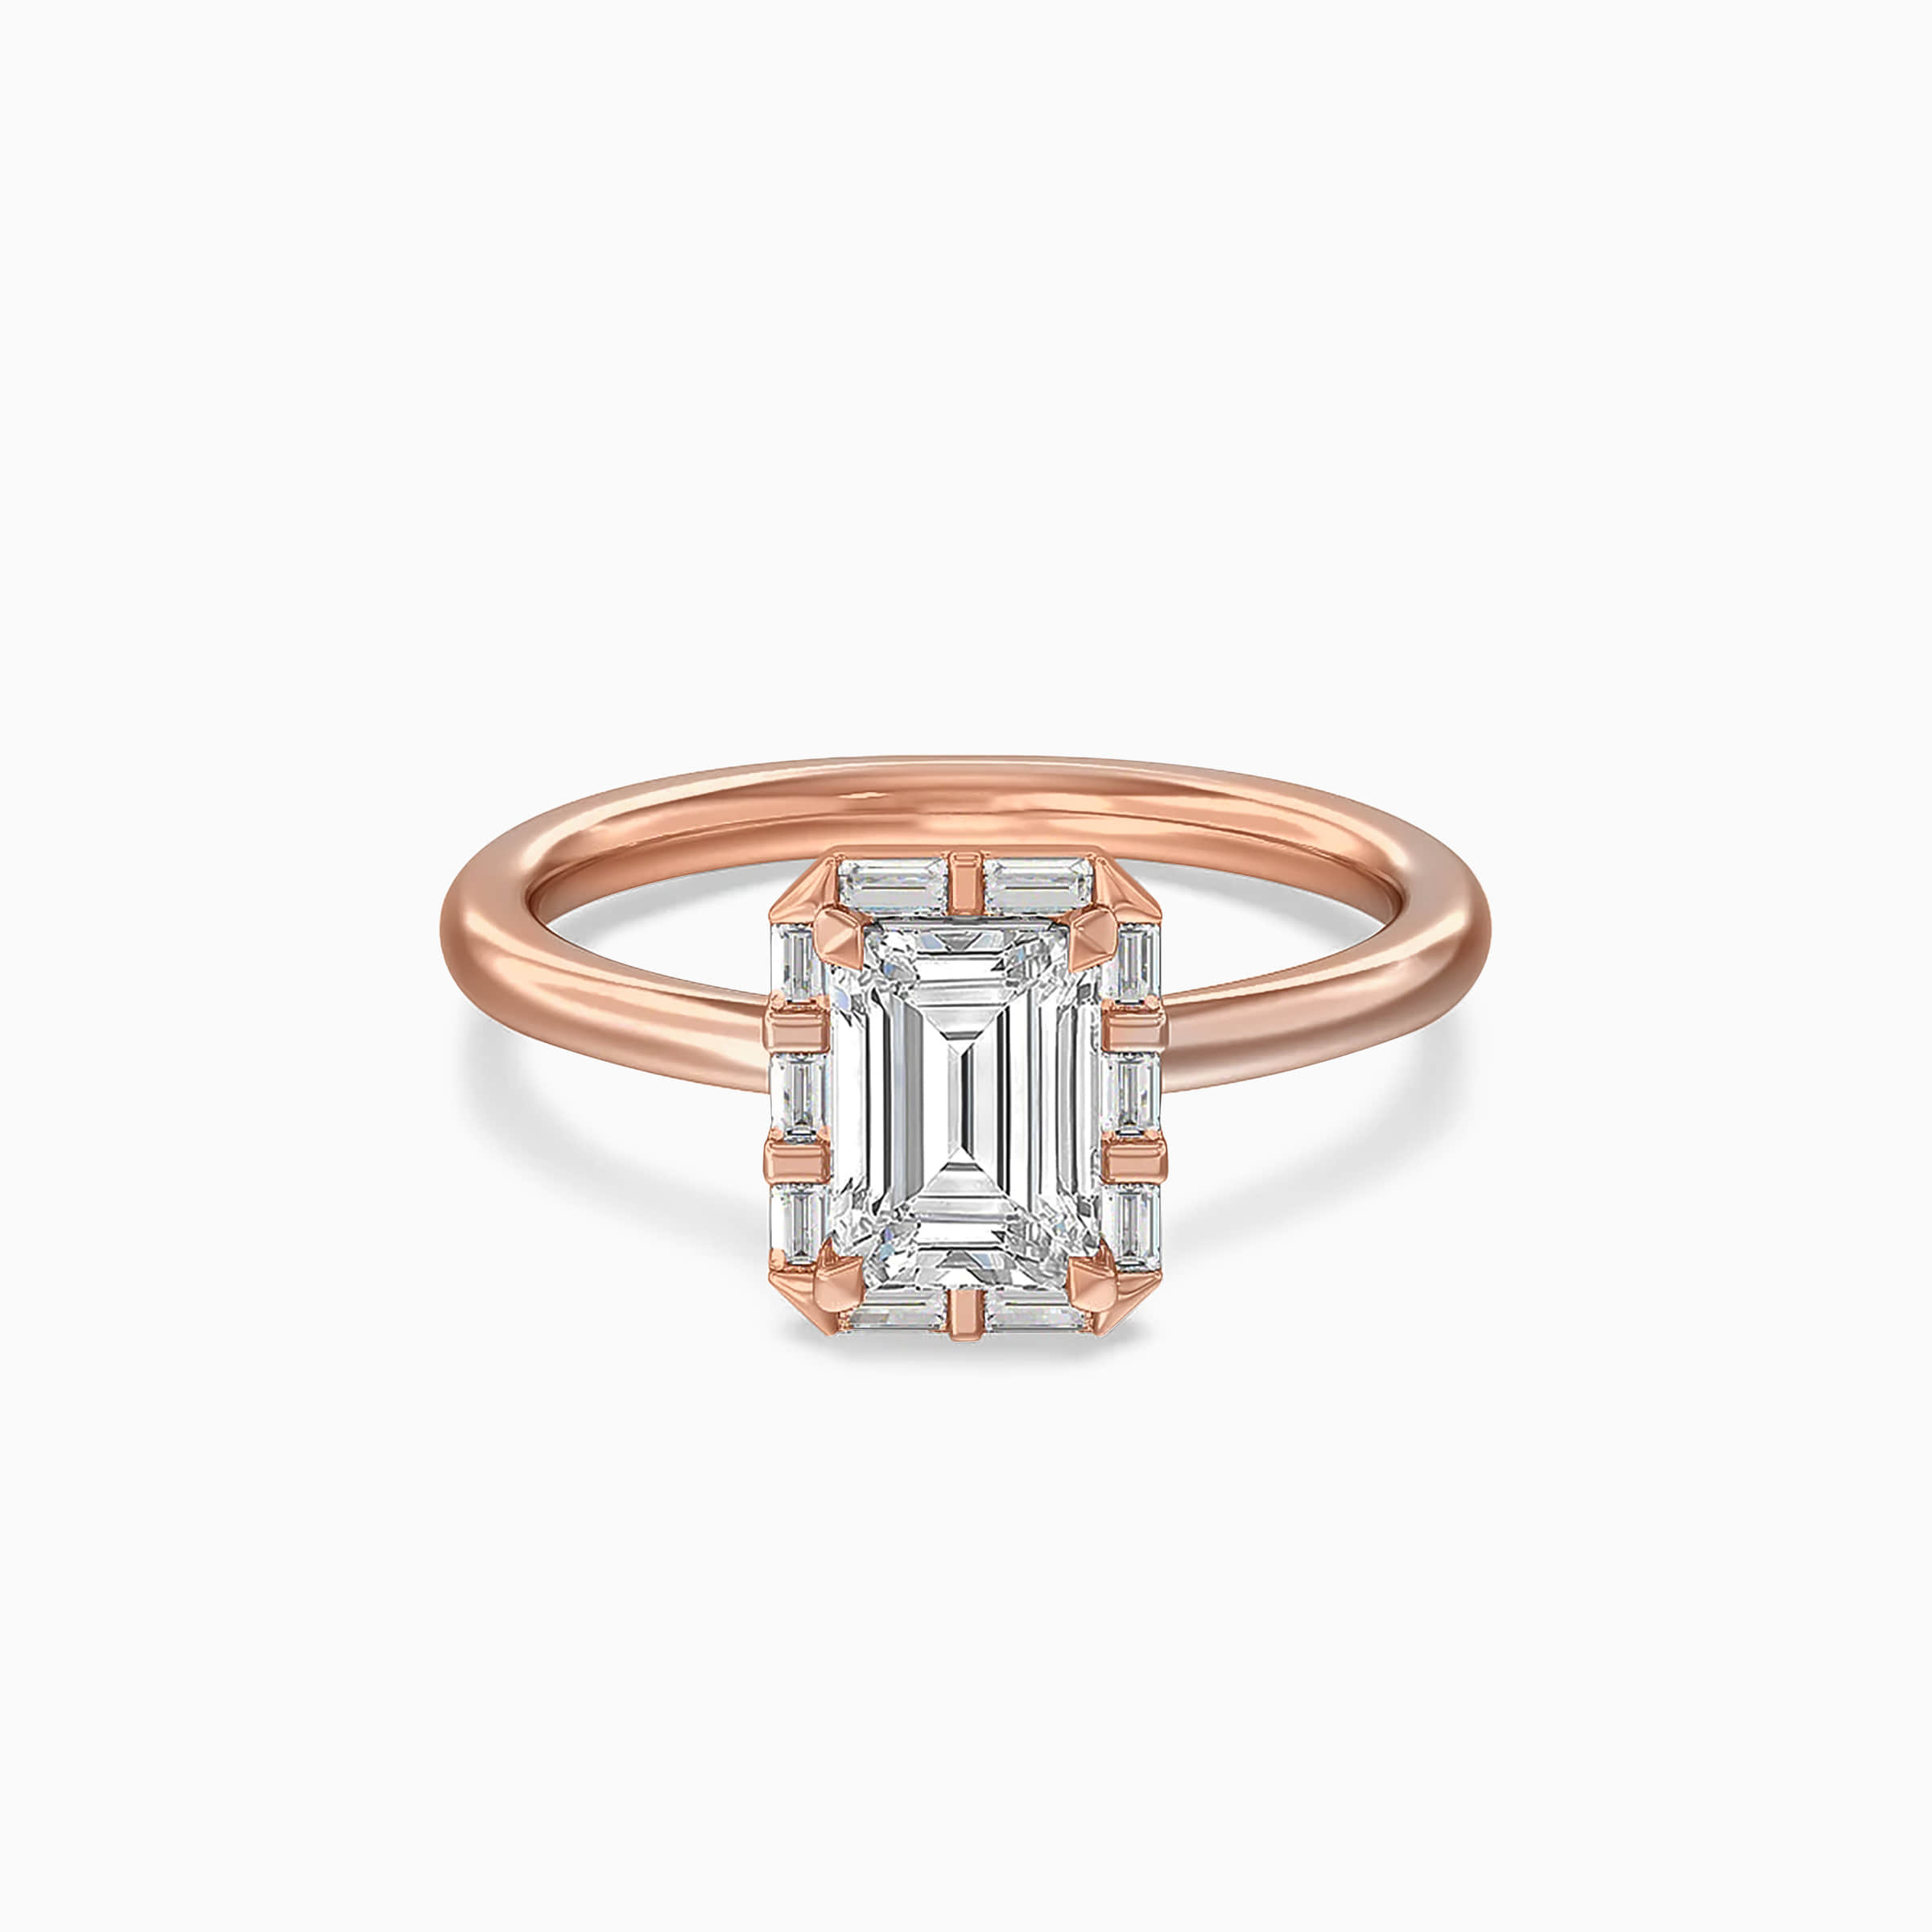 Darry Ring emerald cut halo engagement ring rose gold